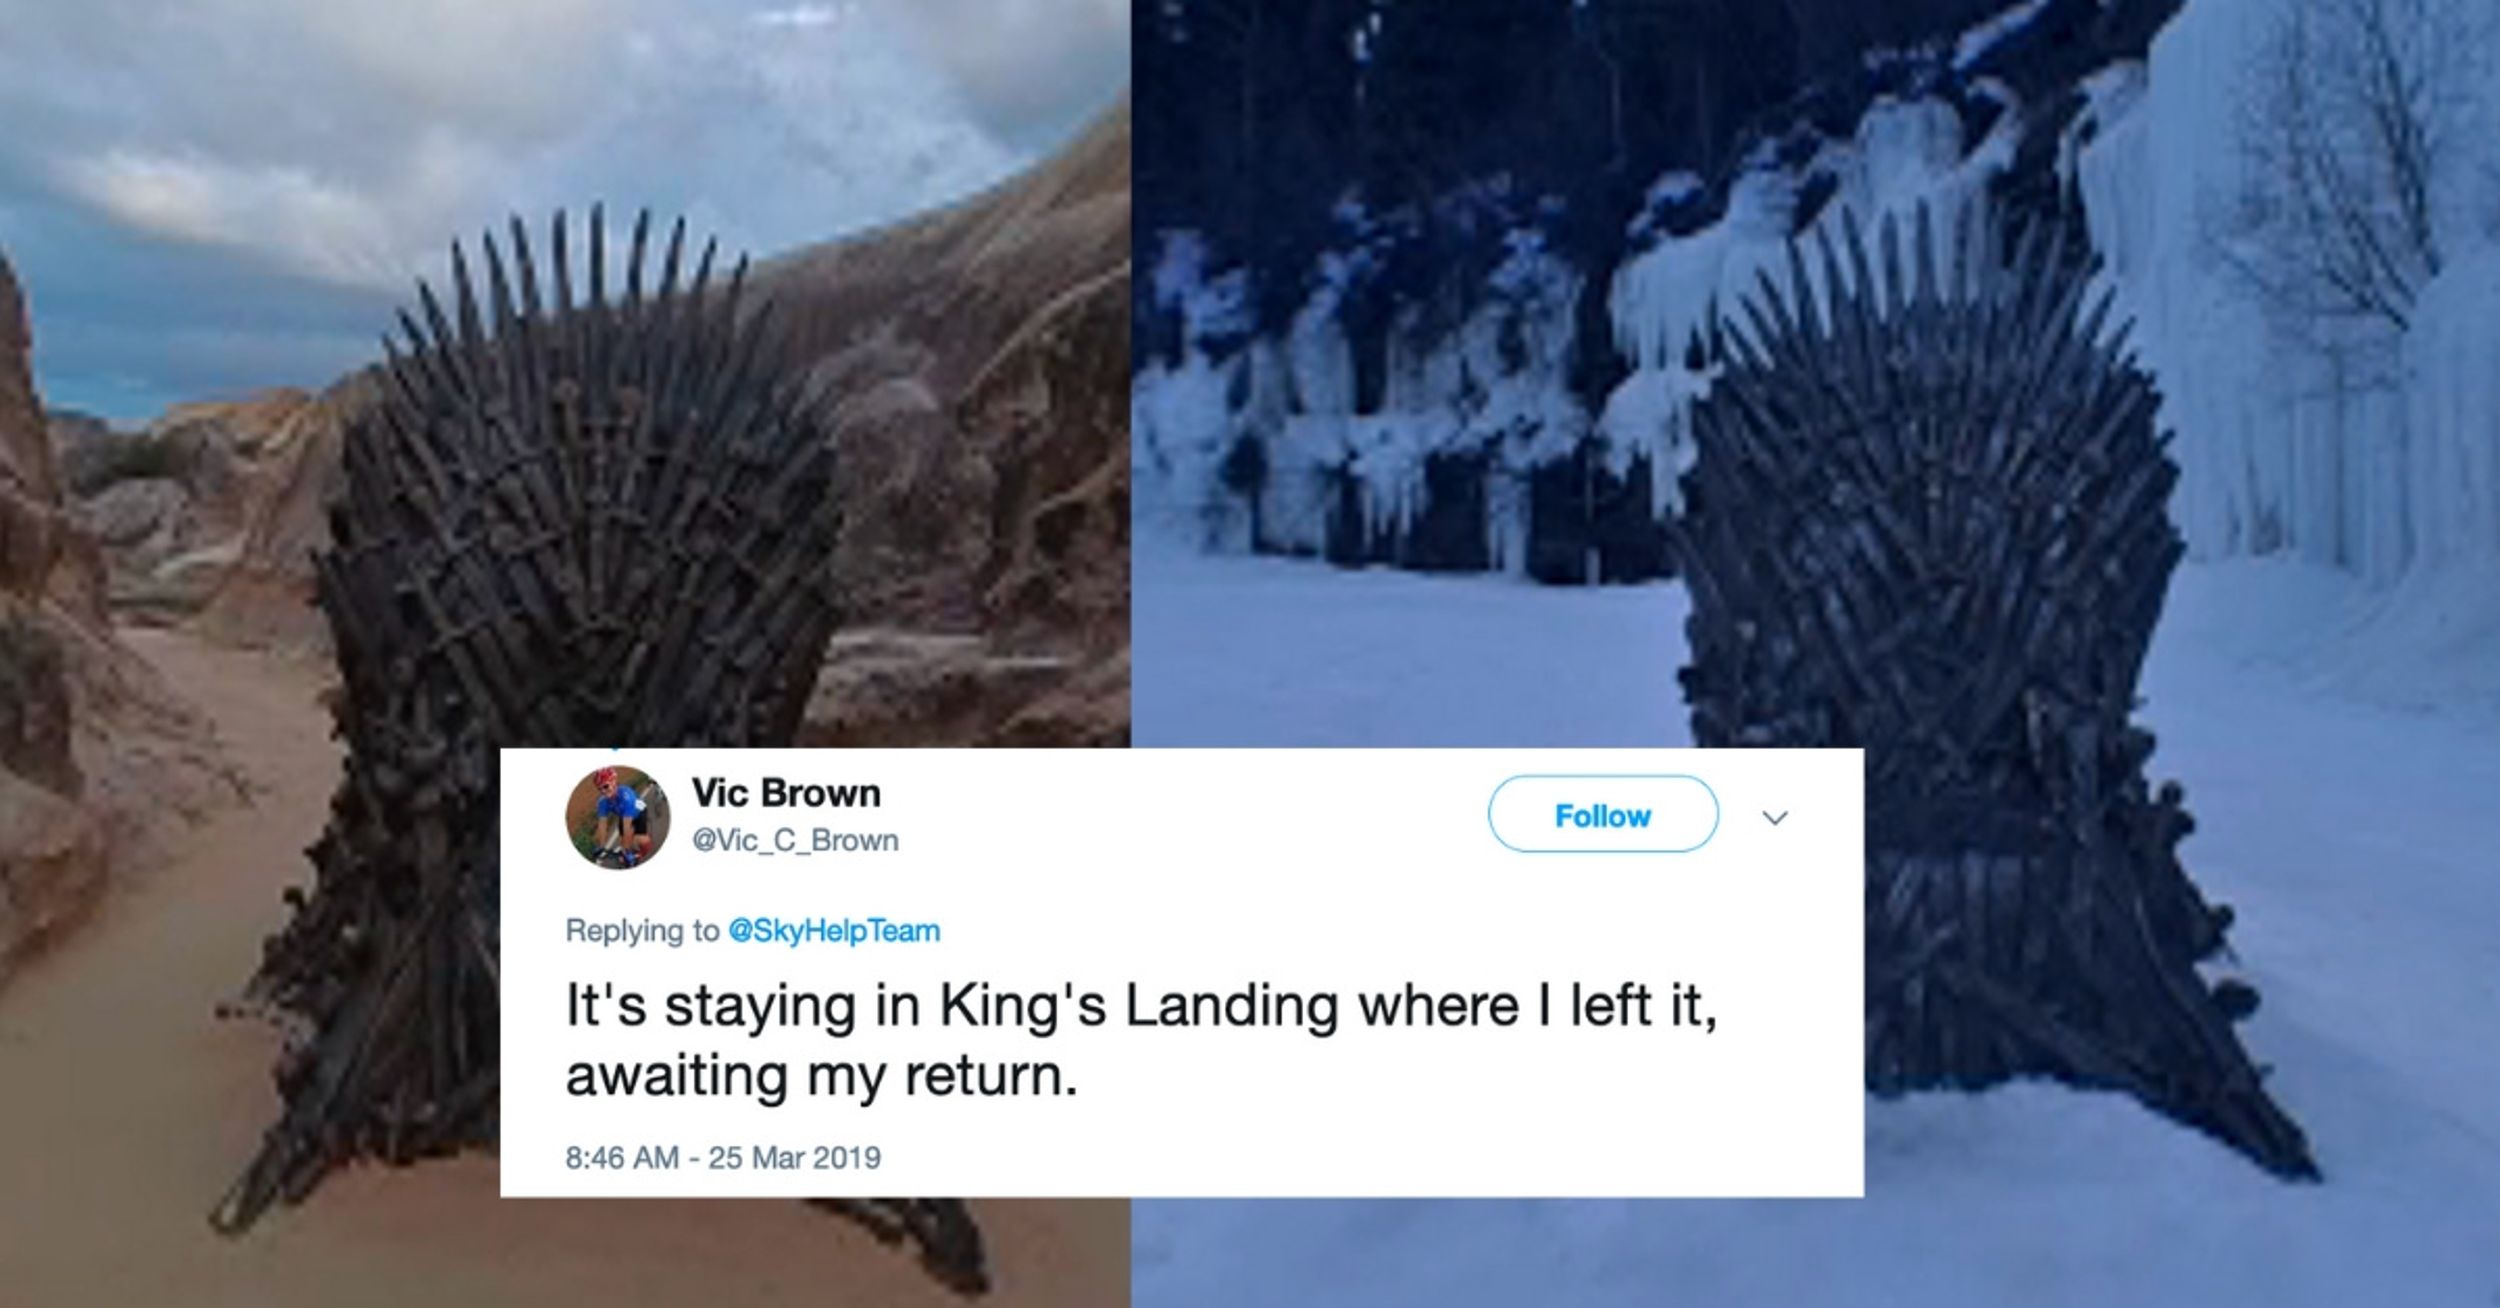 'Game Of Thrones' Hid Six Iron Thrones Around The World, And People Are Quickly Finding Them